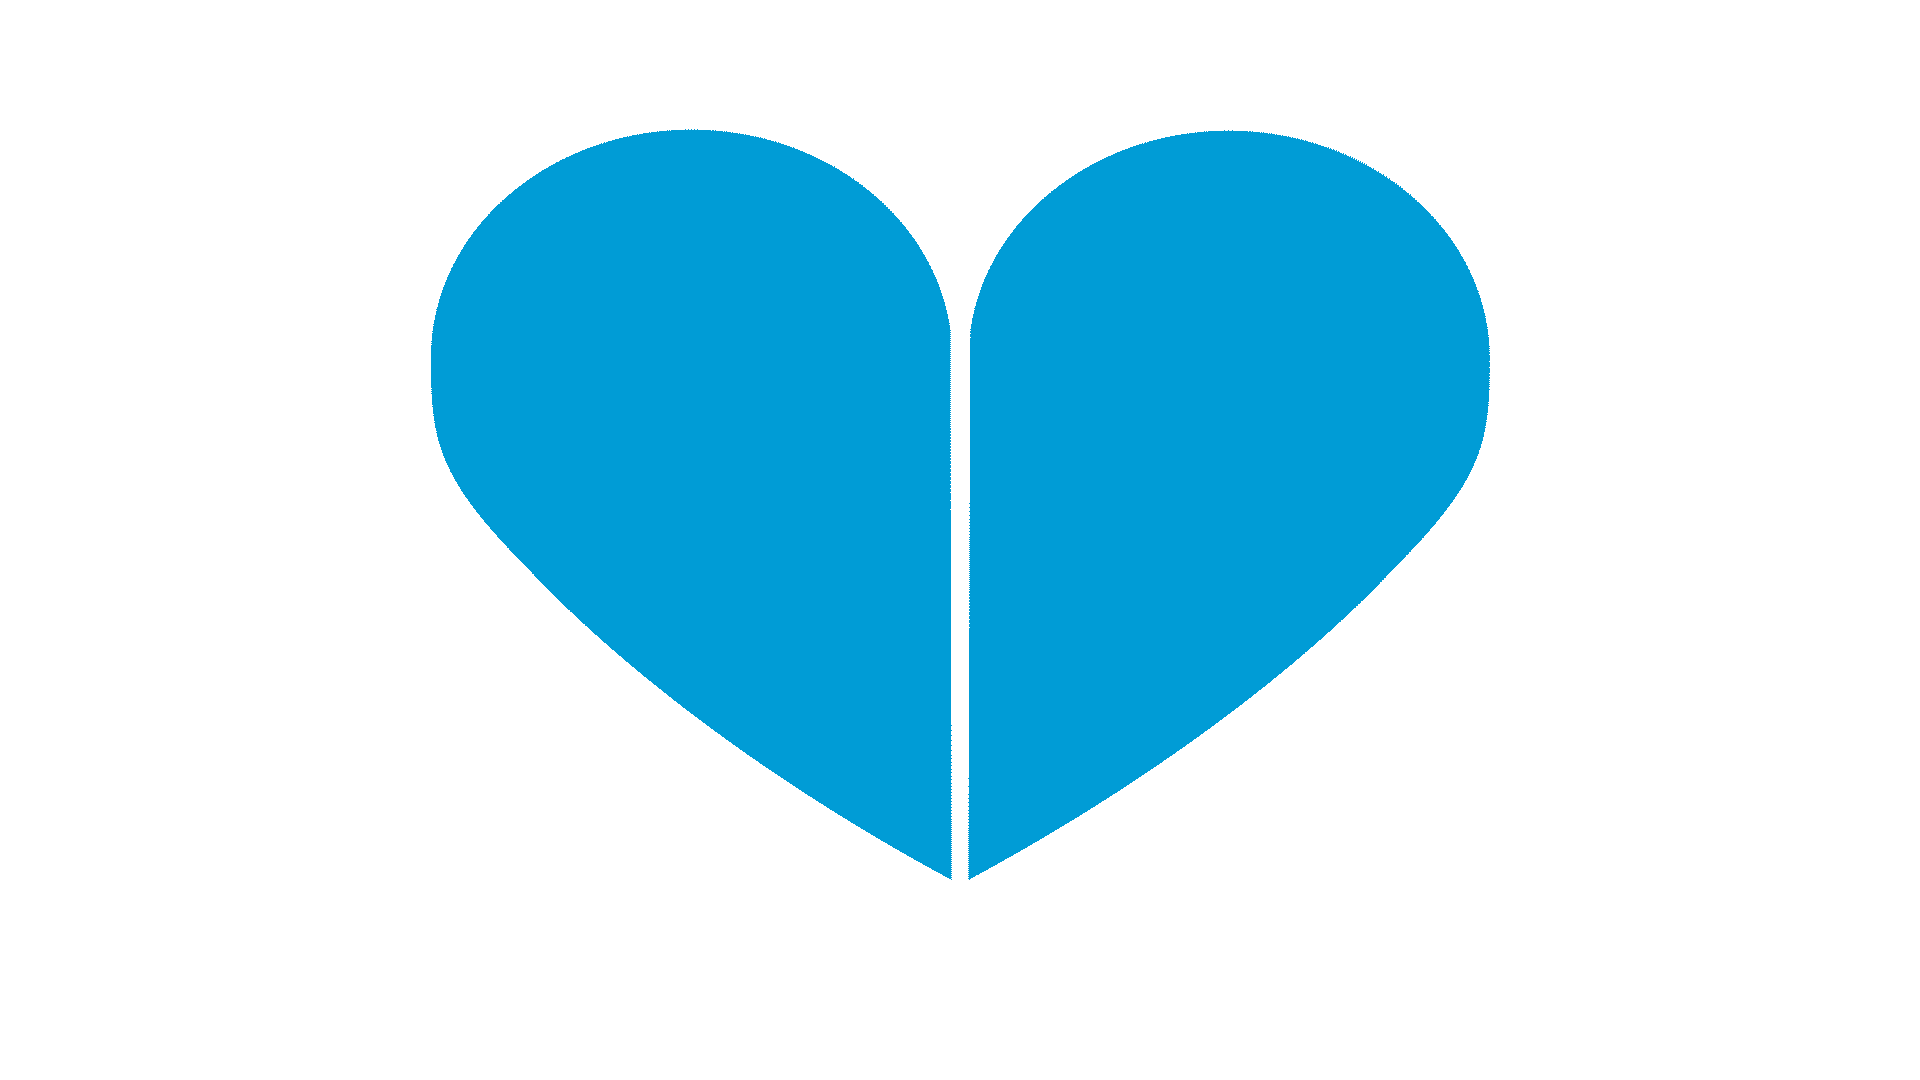 A blue folded heart opens from the center to showcase its symmetry.